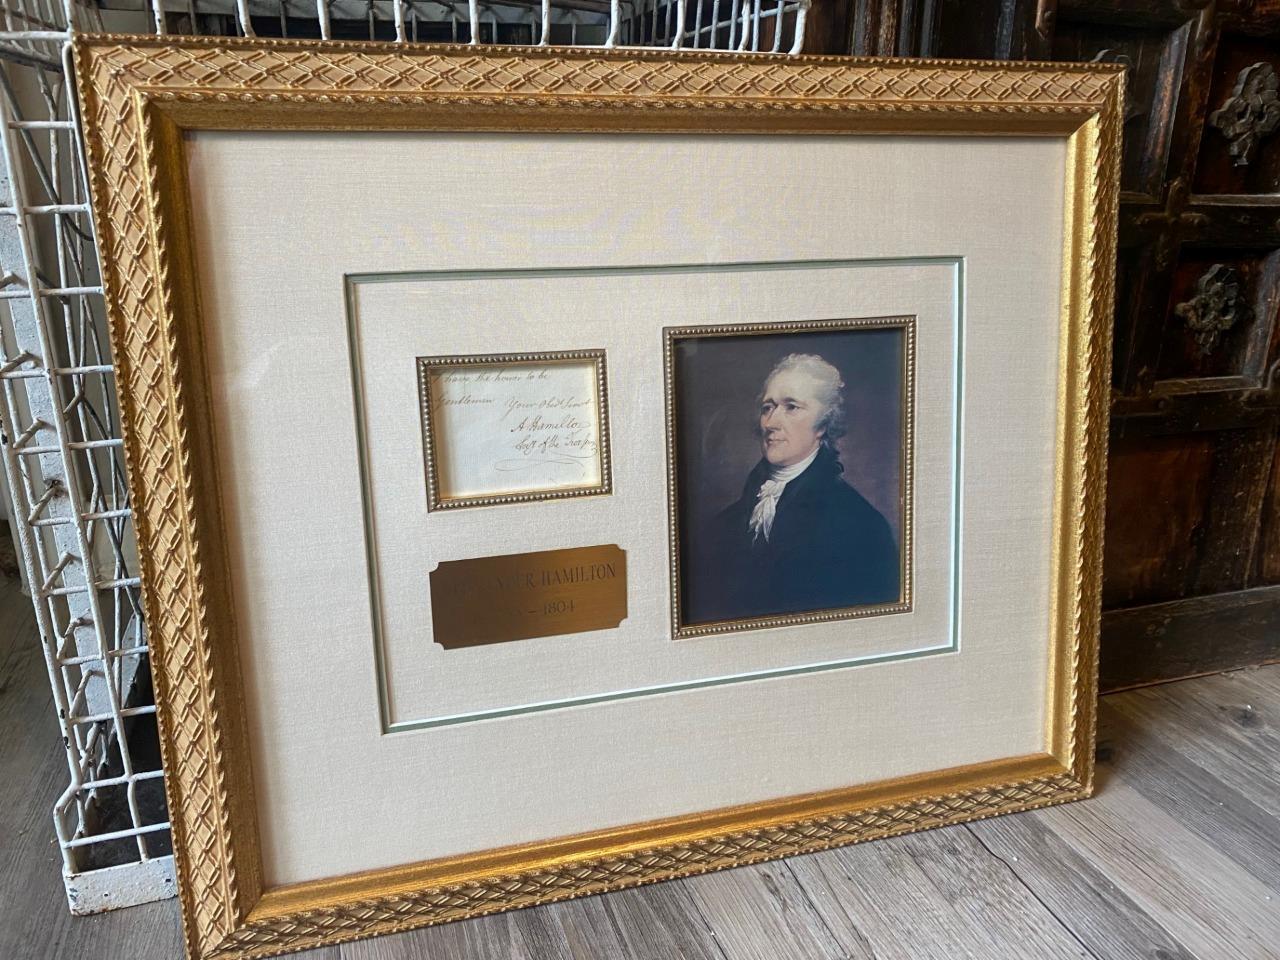 RARE Framed Signed Letter/Note by American Founding Father ALEXANDER HAMILTON